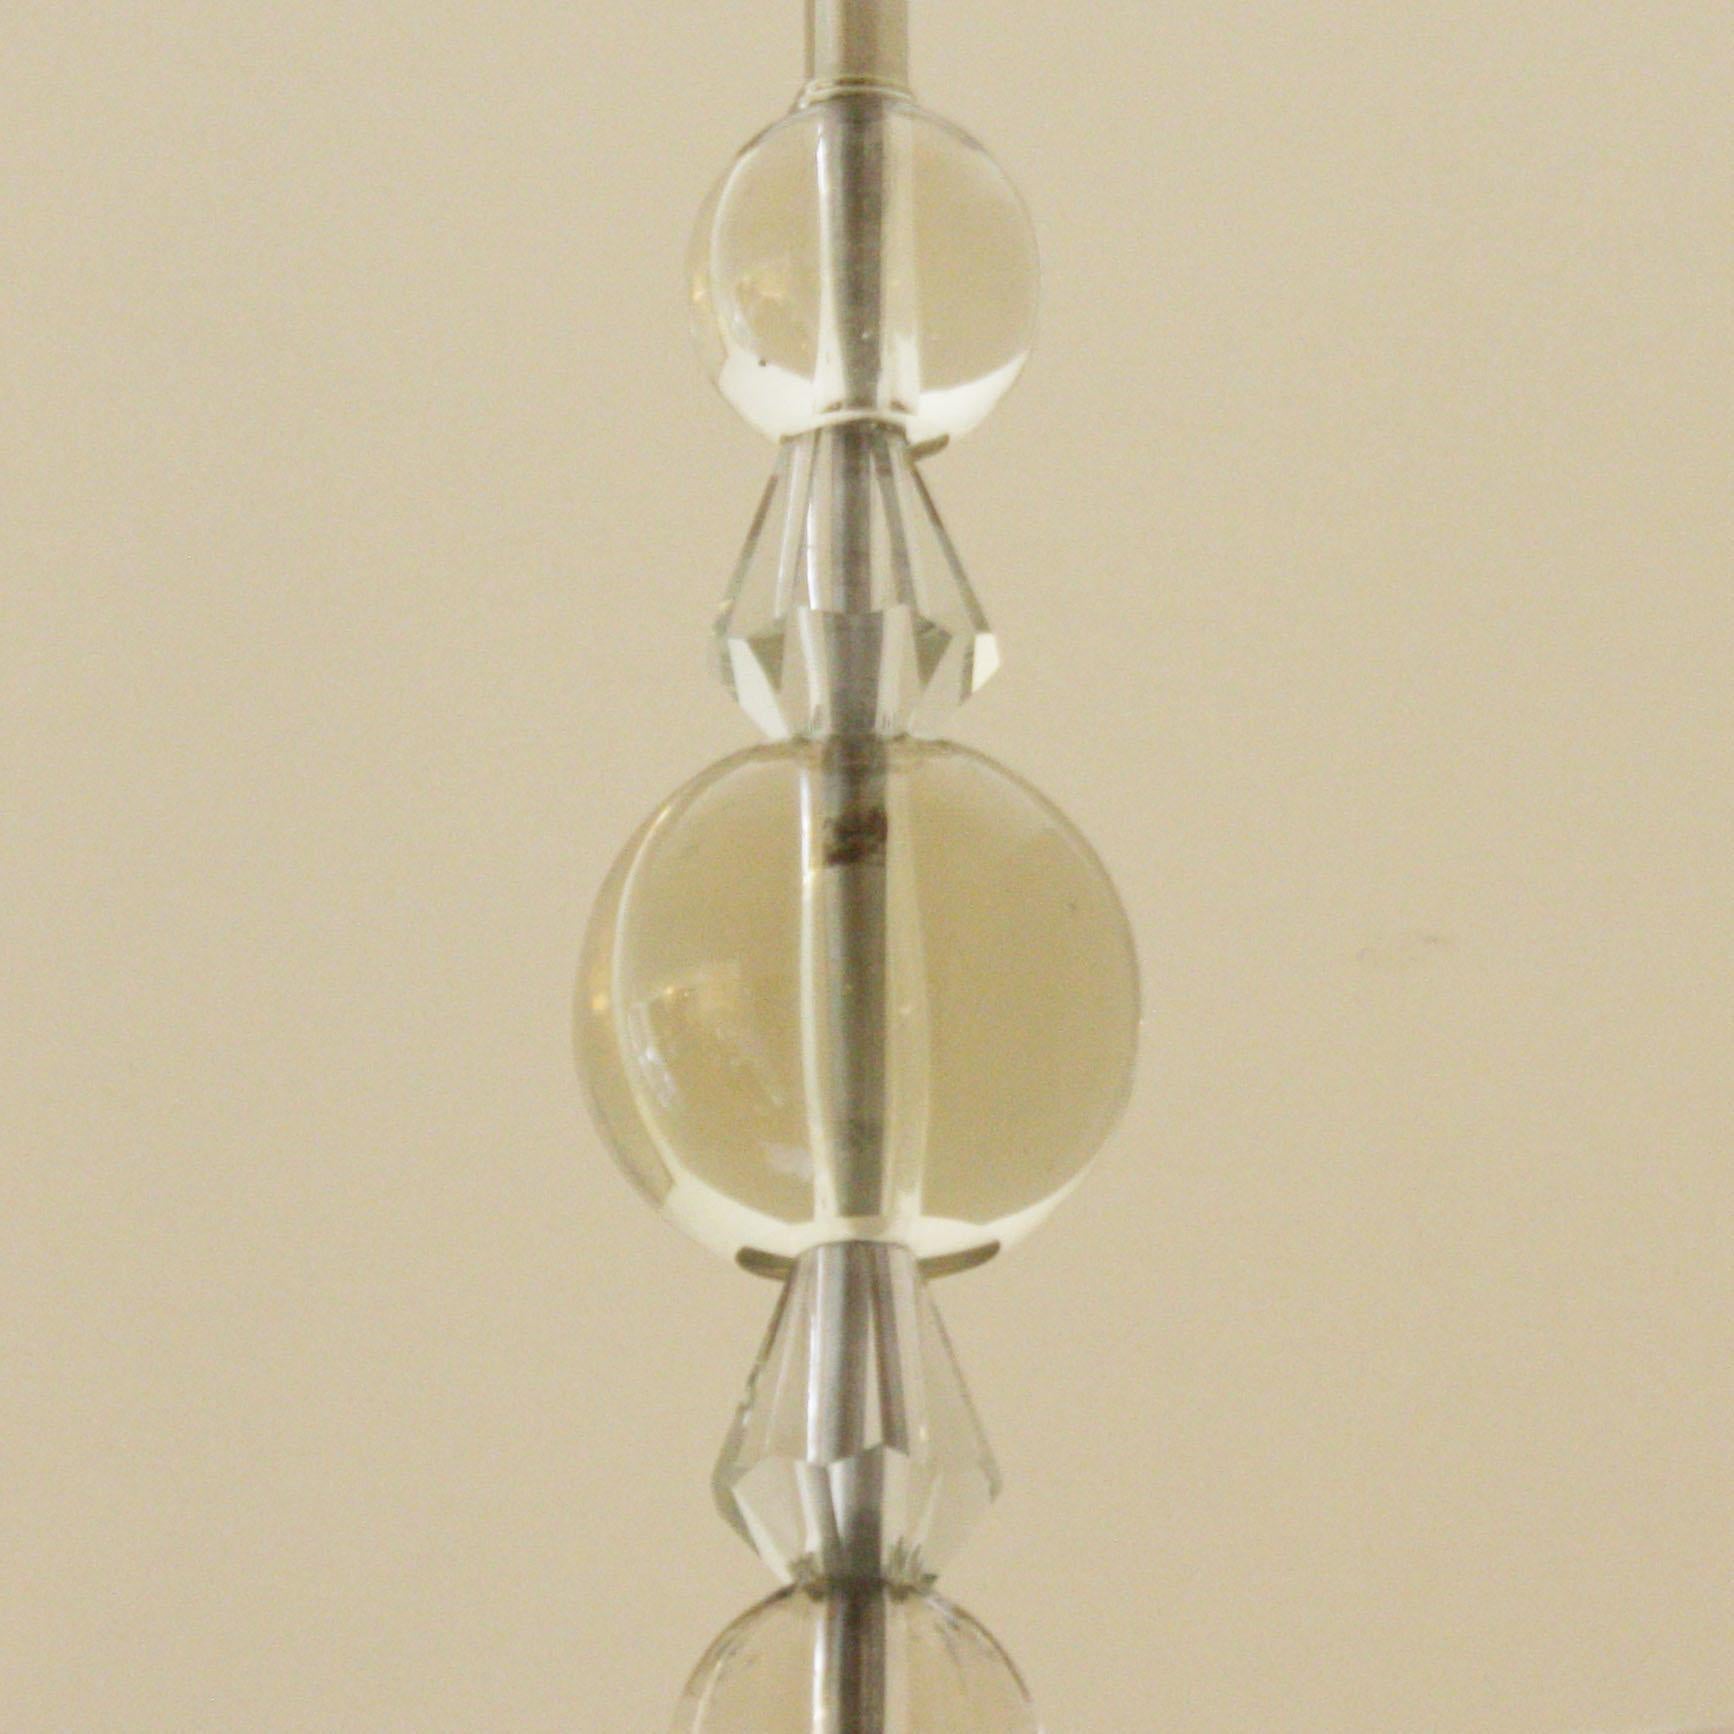 French chandelier in the style of Jacques Adnet, circa 1940
Measures: 21” diameter X 23” height.